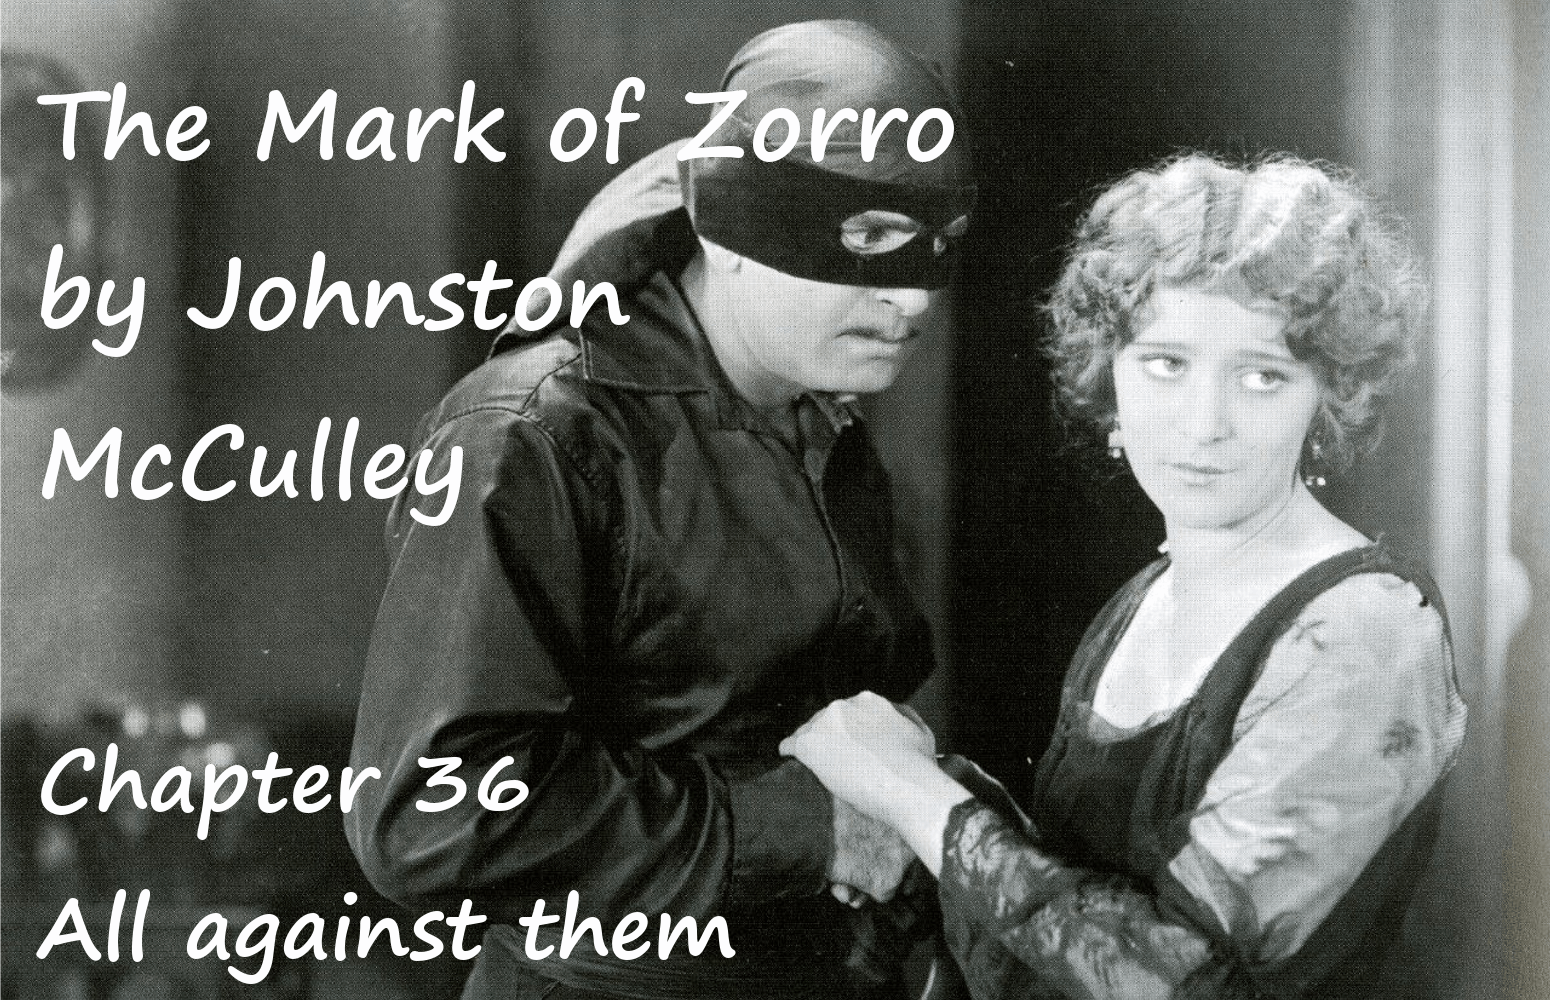 The Mark of Zorro chapter 36 All against them by Johnston McCulley